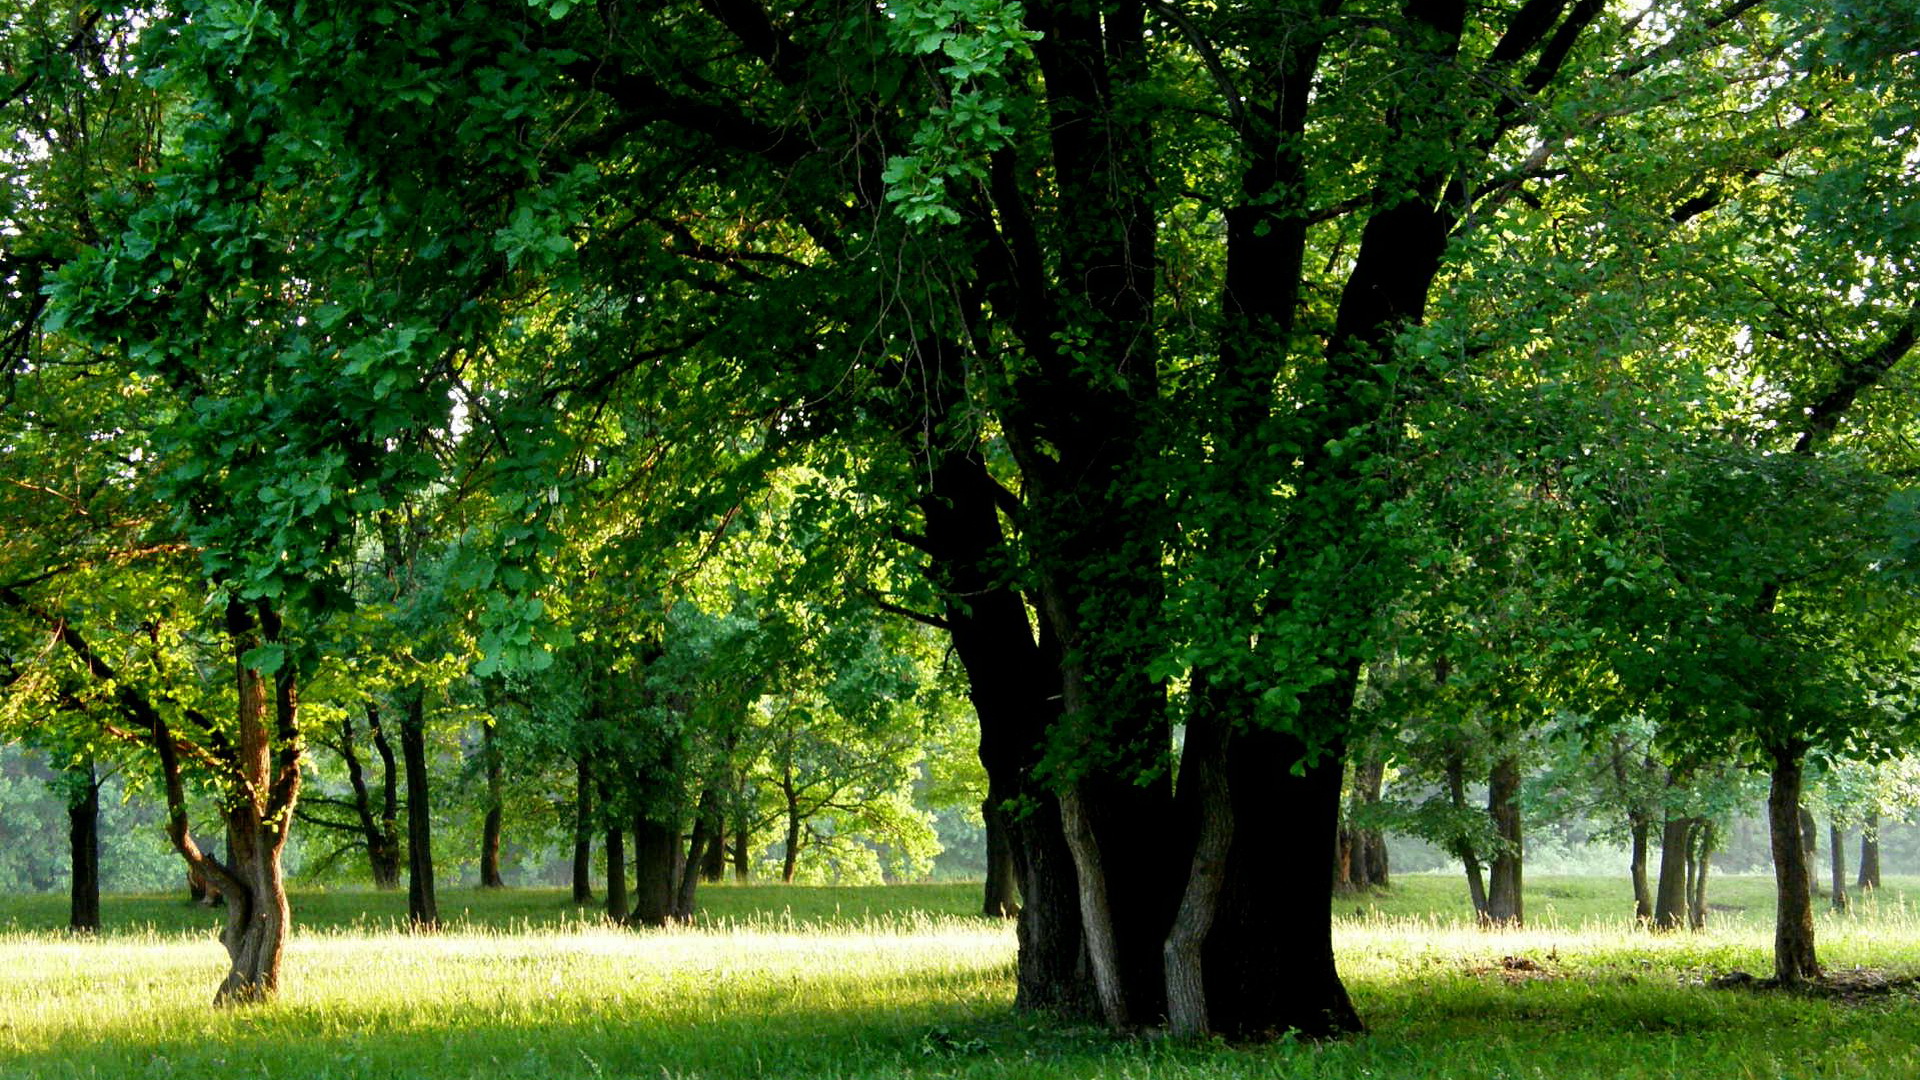 nature images - Tall and Green Trees in Prosperous Growth, Short and Green Grass 1920X1080 free wallpaper download